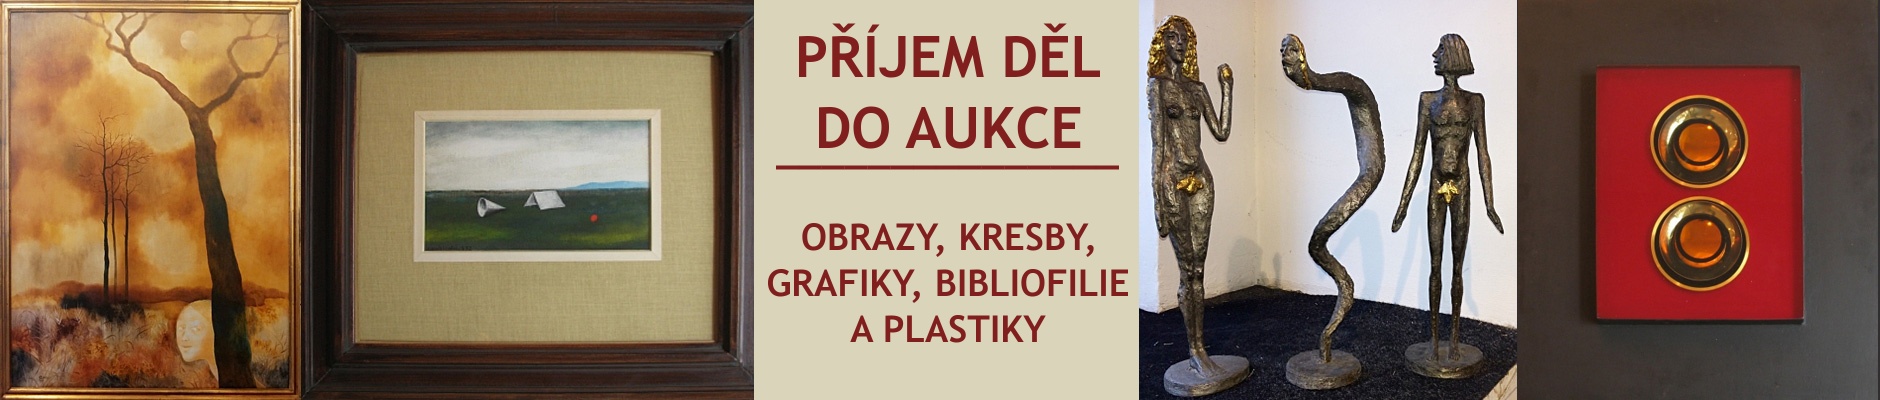 aukce